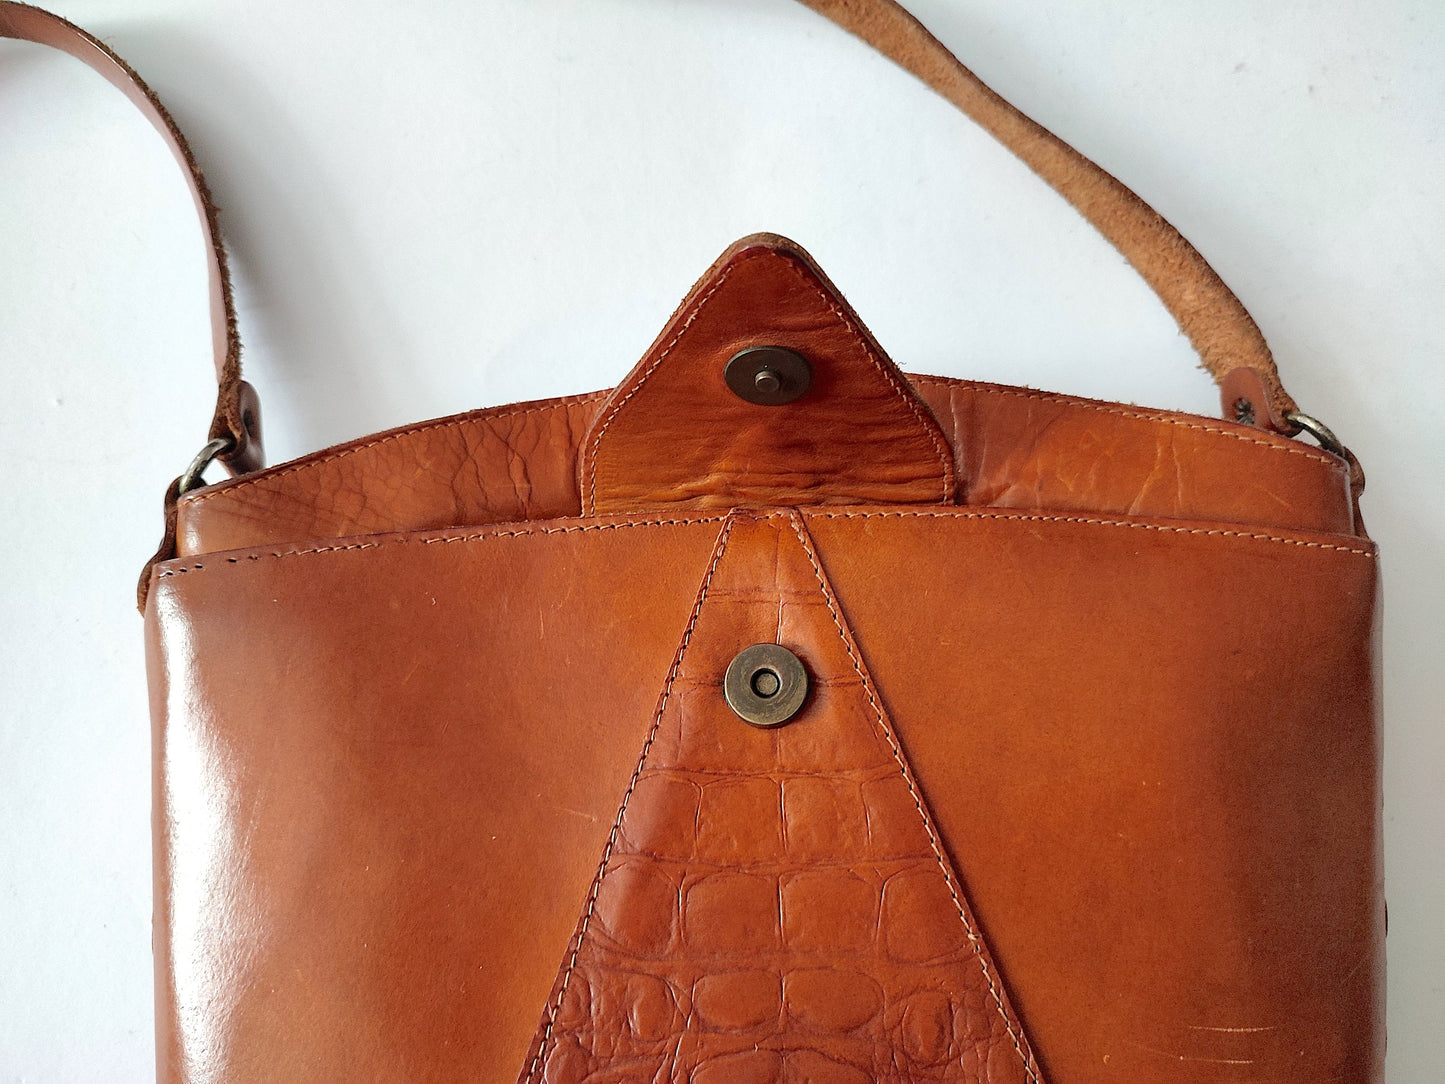 Vintage brown leather bag with a long handle. 90s